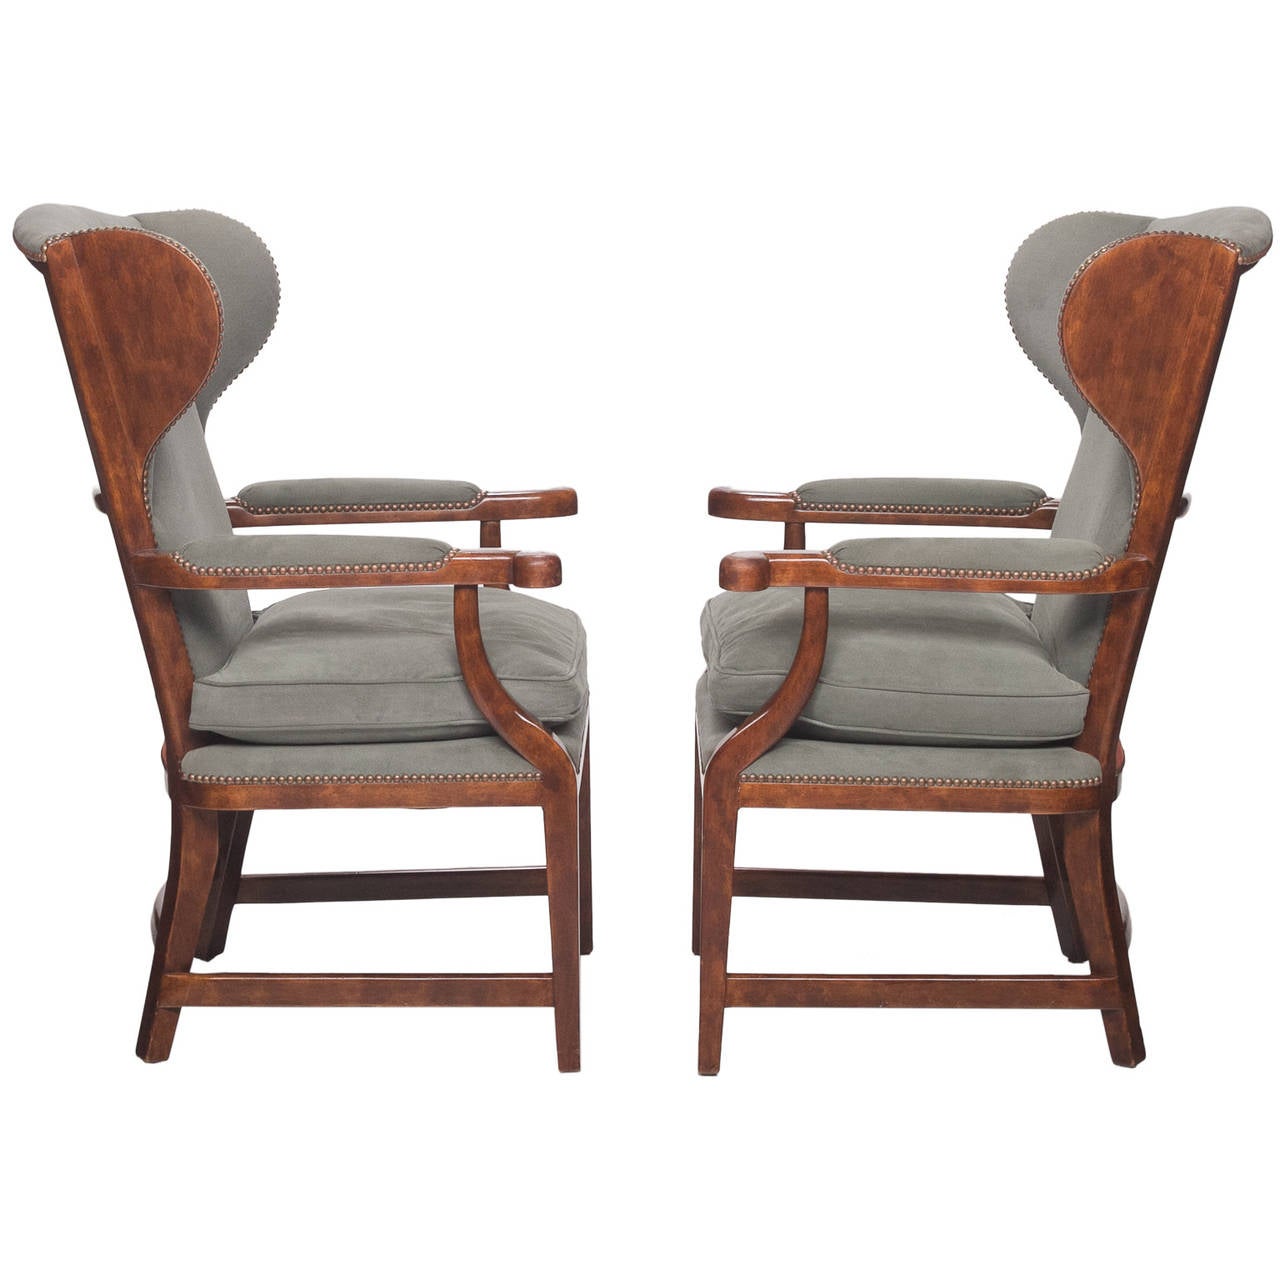 A fine pair of Alder wood “English Barber Chairs” from the well-known company Minton-Spidell furniture of LA. The chairs are in very nice condition and were purchased from an estate. Fabric is relevant and in excellent condition.

Dimensions: